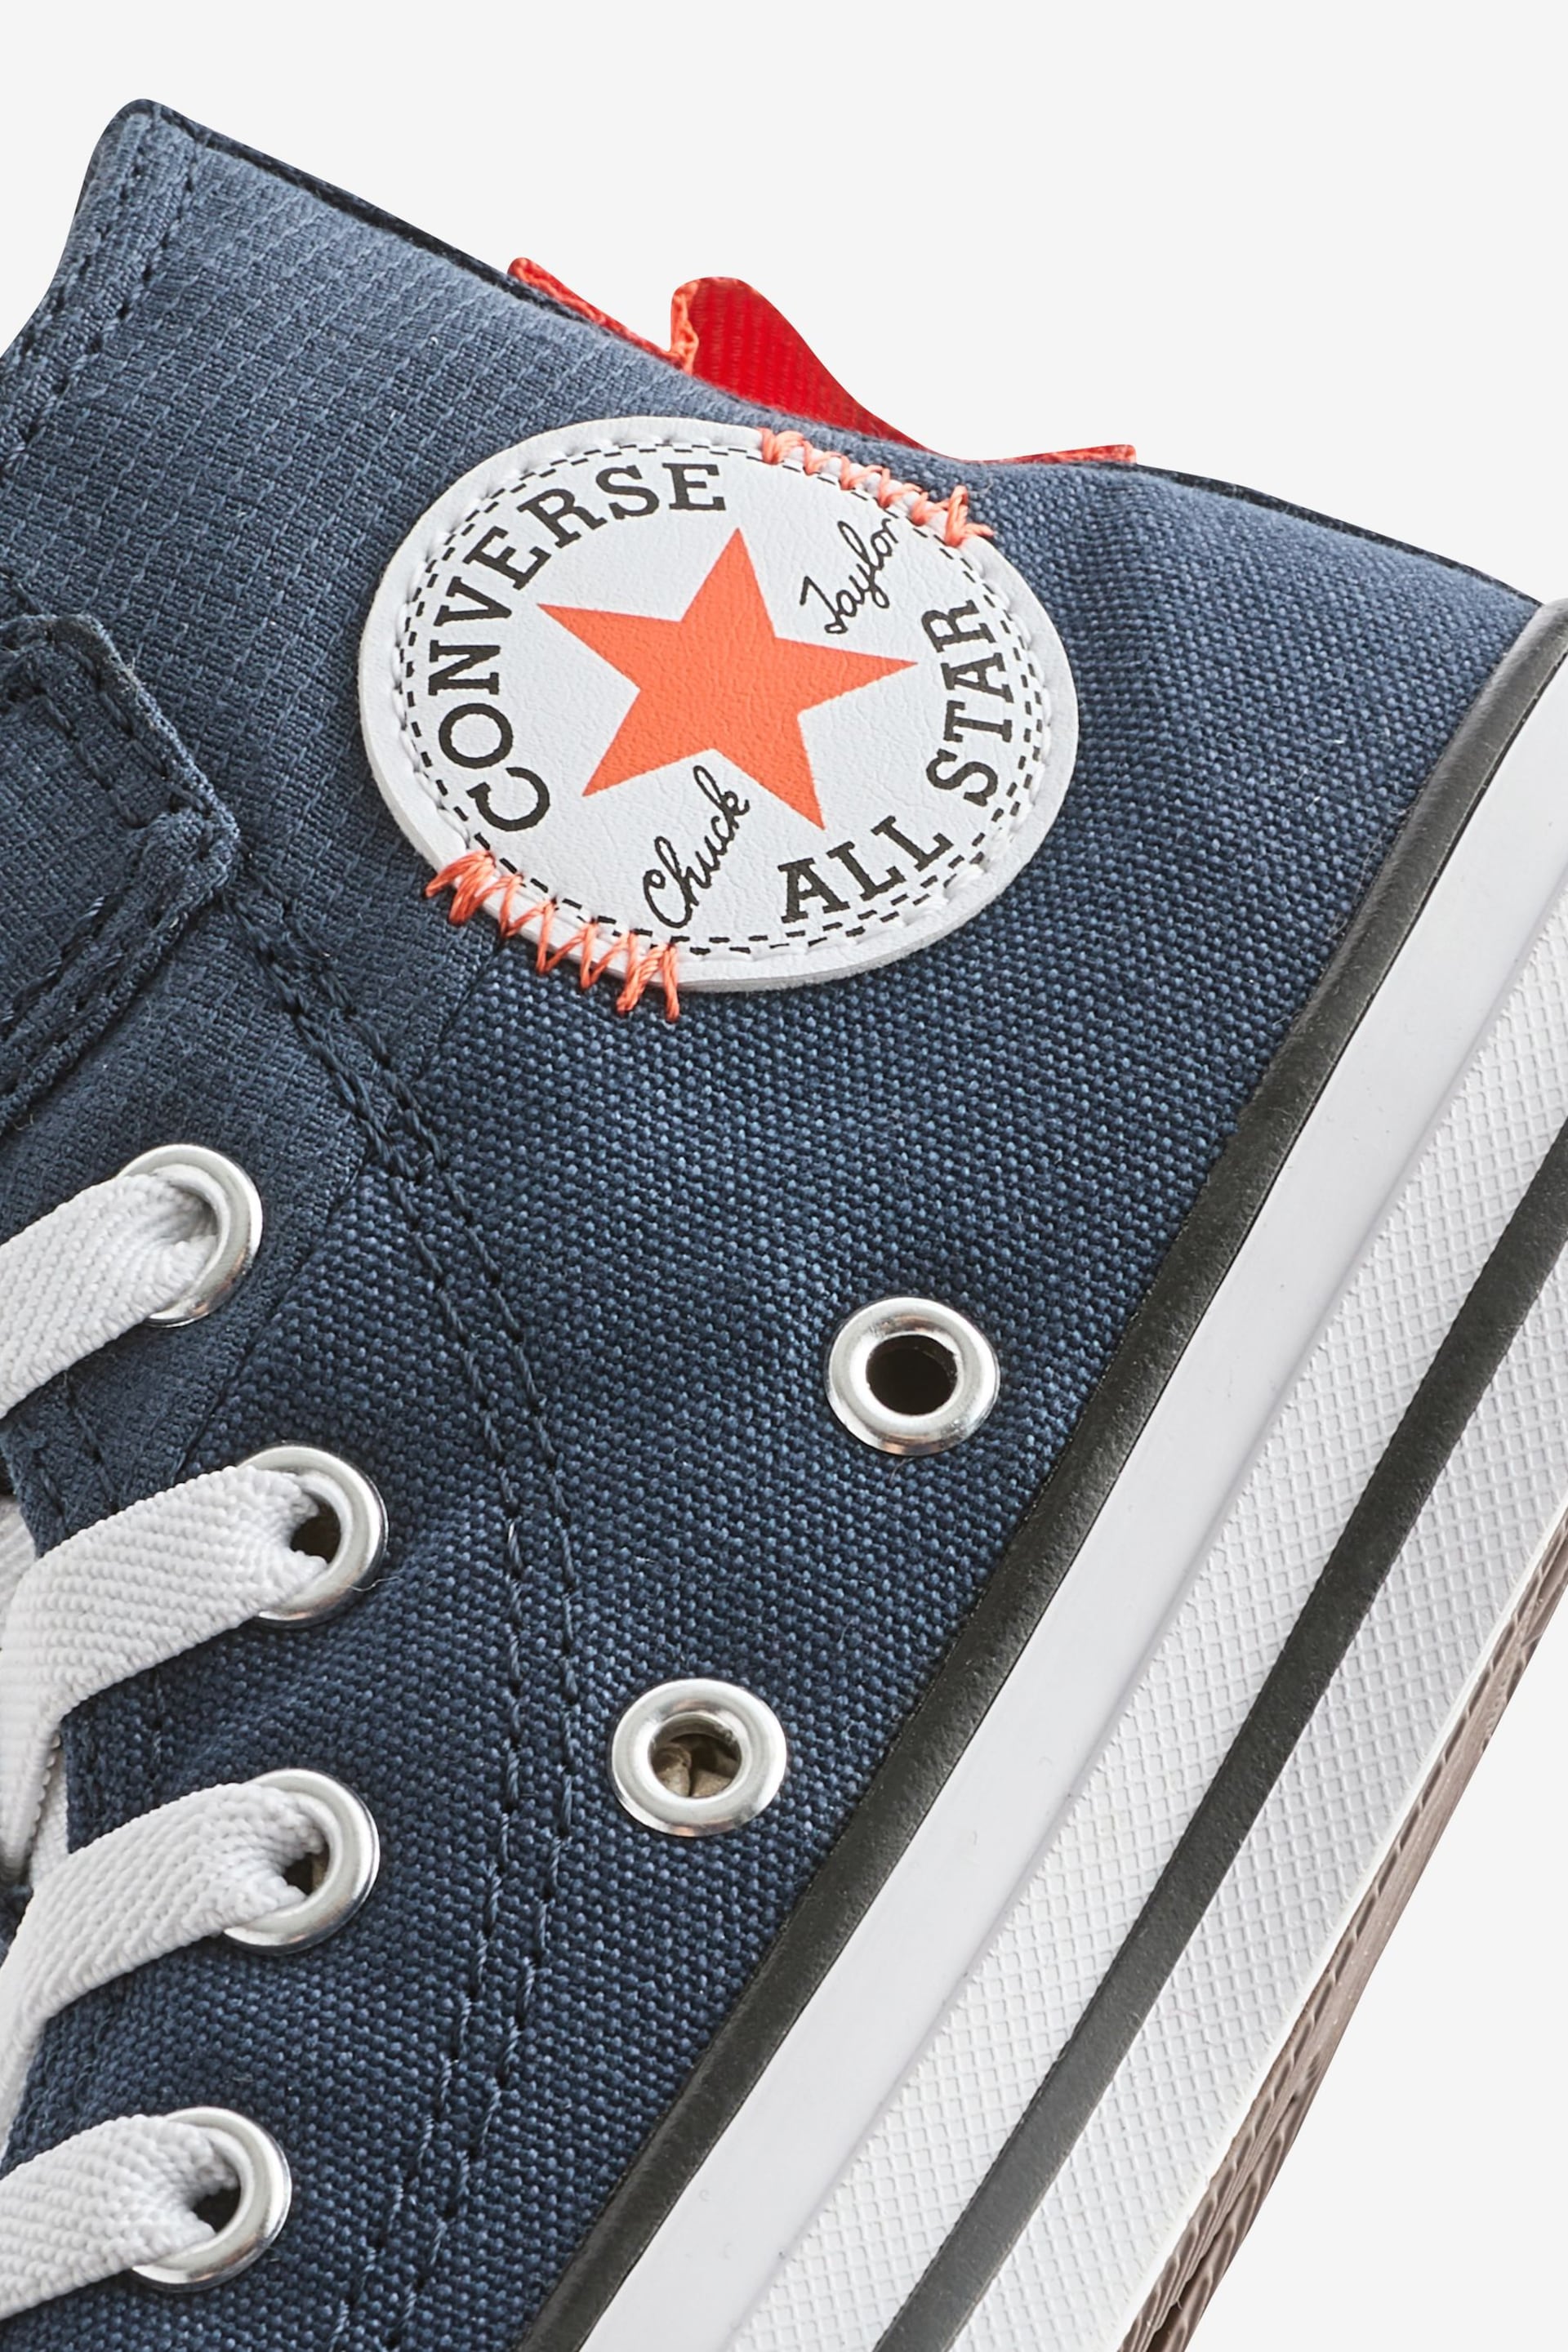 Converse Navy Junior Chuck Taylor All Star 1V Trainers - Image 8 of 9